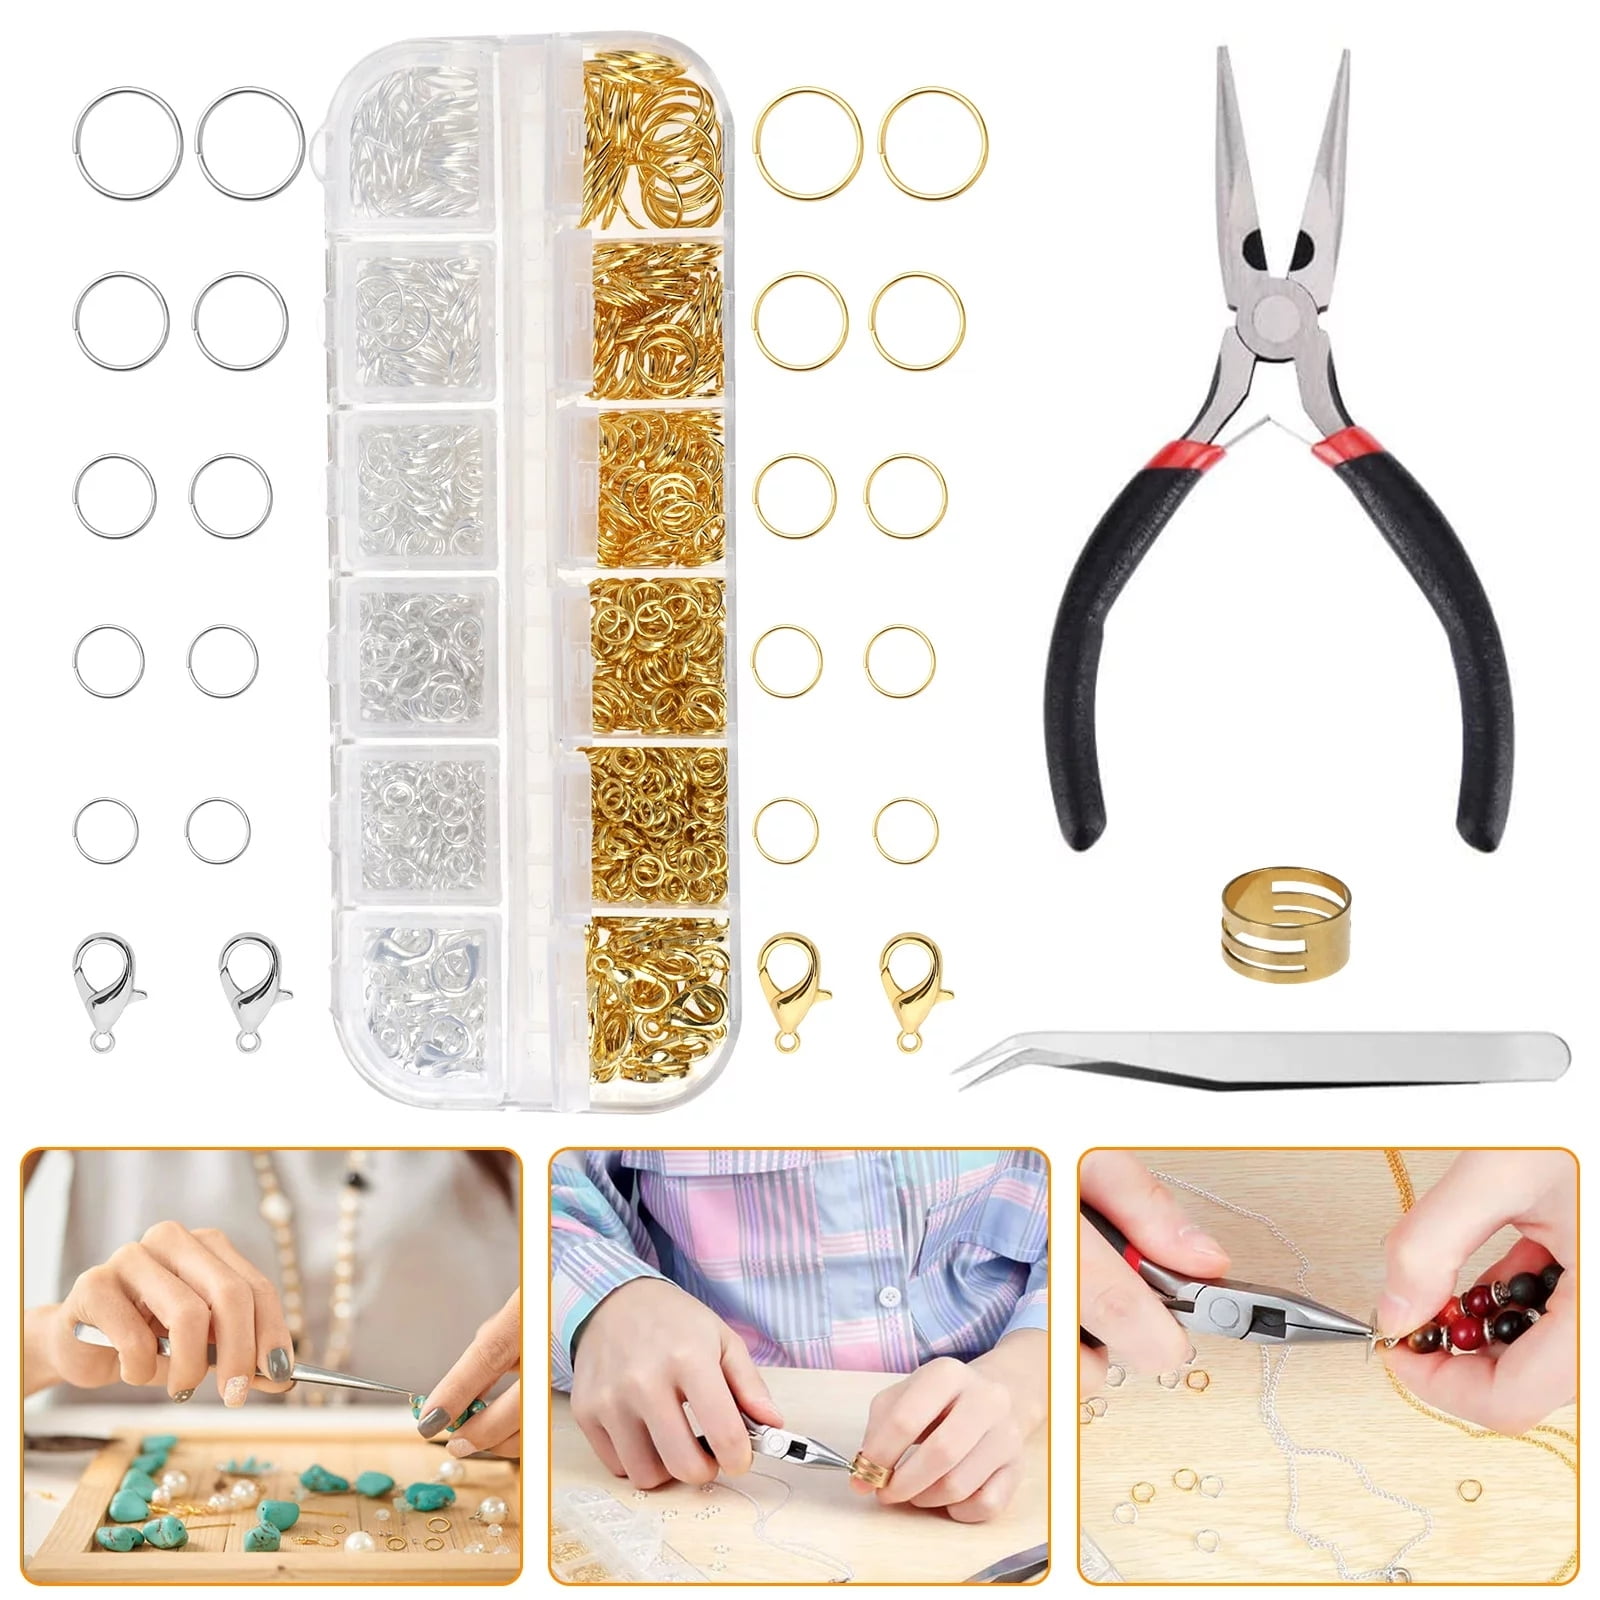 4 Pack 1203Pcs/Pack DIY Jewelry Making Tool Kit Supplies Kit Jewelry Repair Tools with Accessories, Women's, Size: One size, Gold